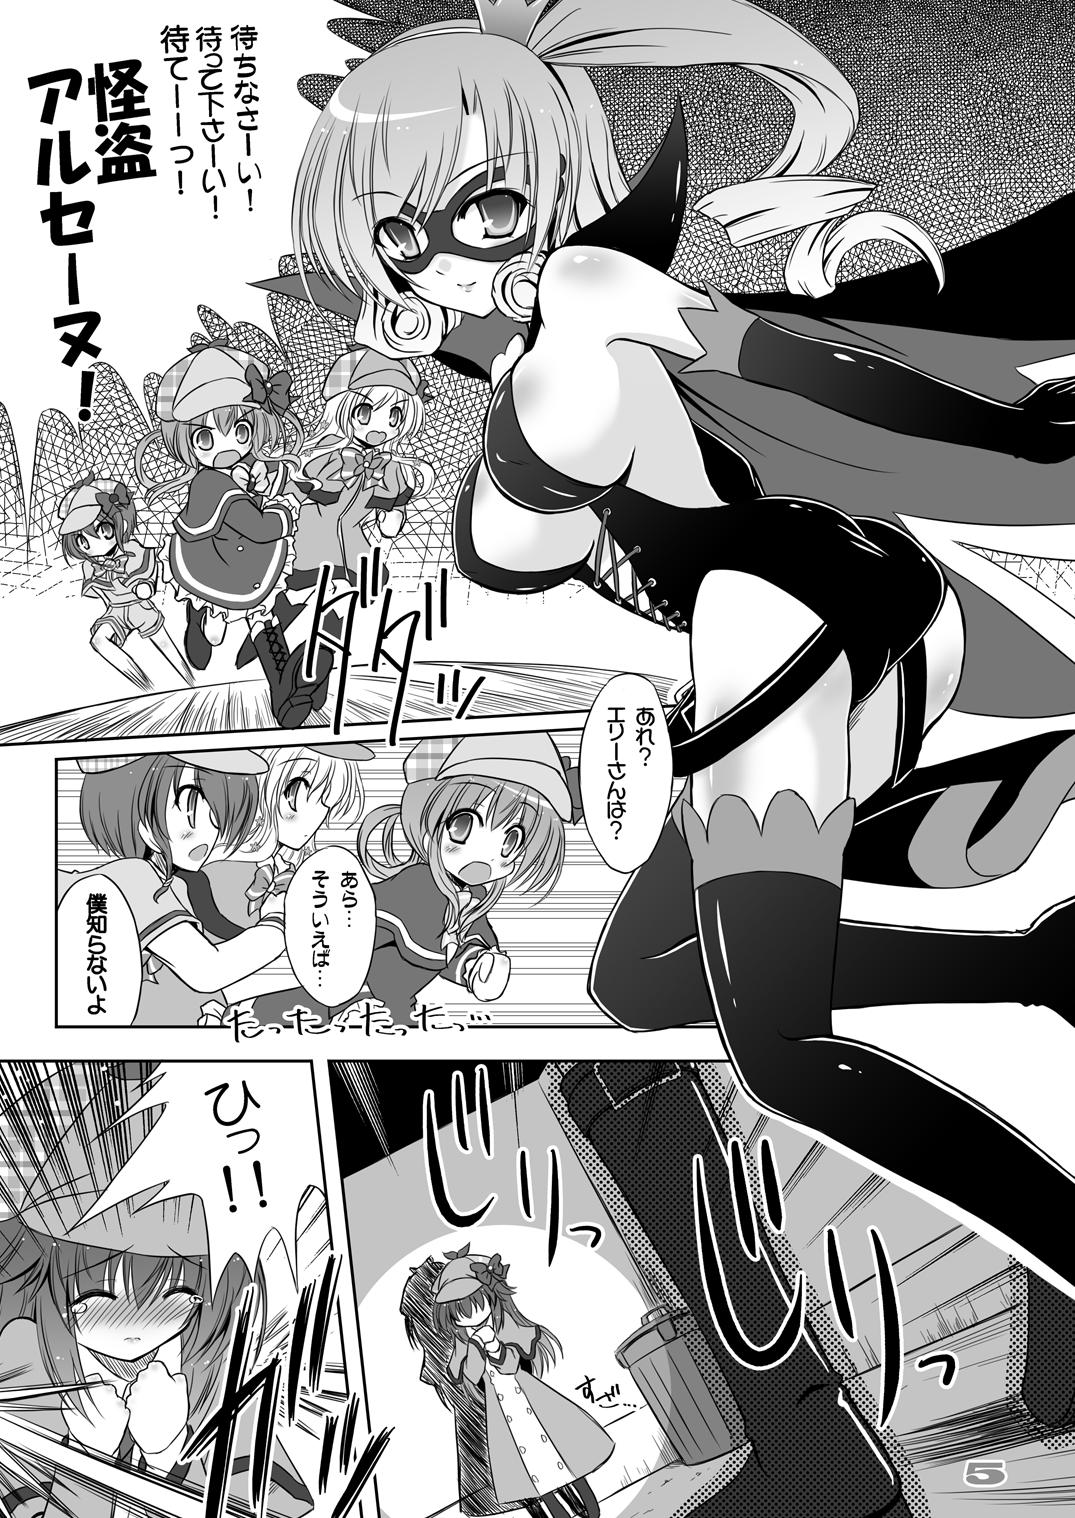 Party Chocolate Box - Tantei opera milky holmes Stepdaughter - Page 5